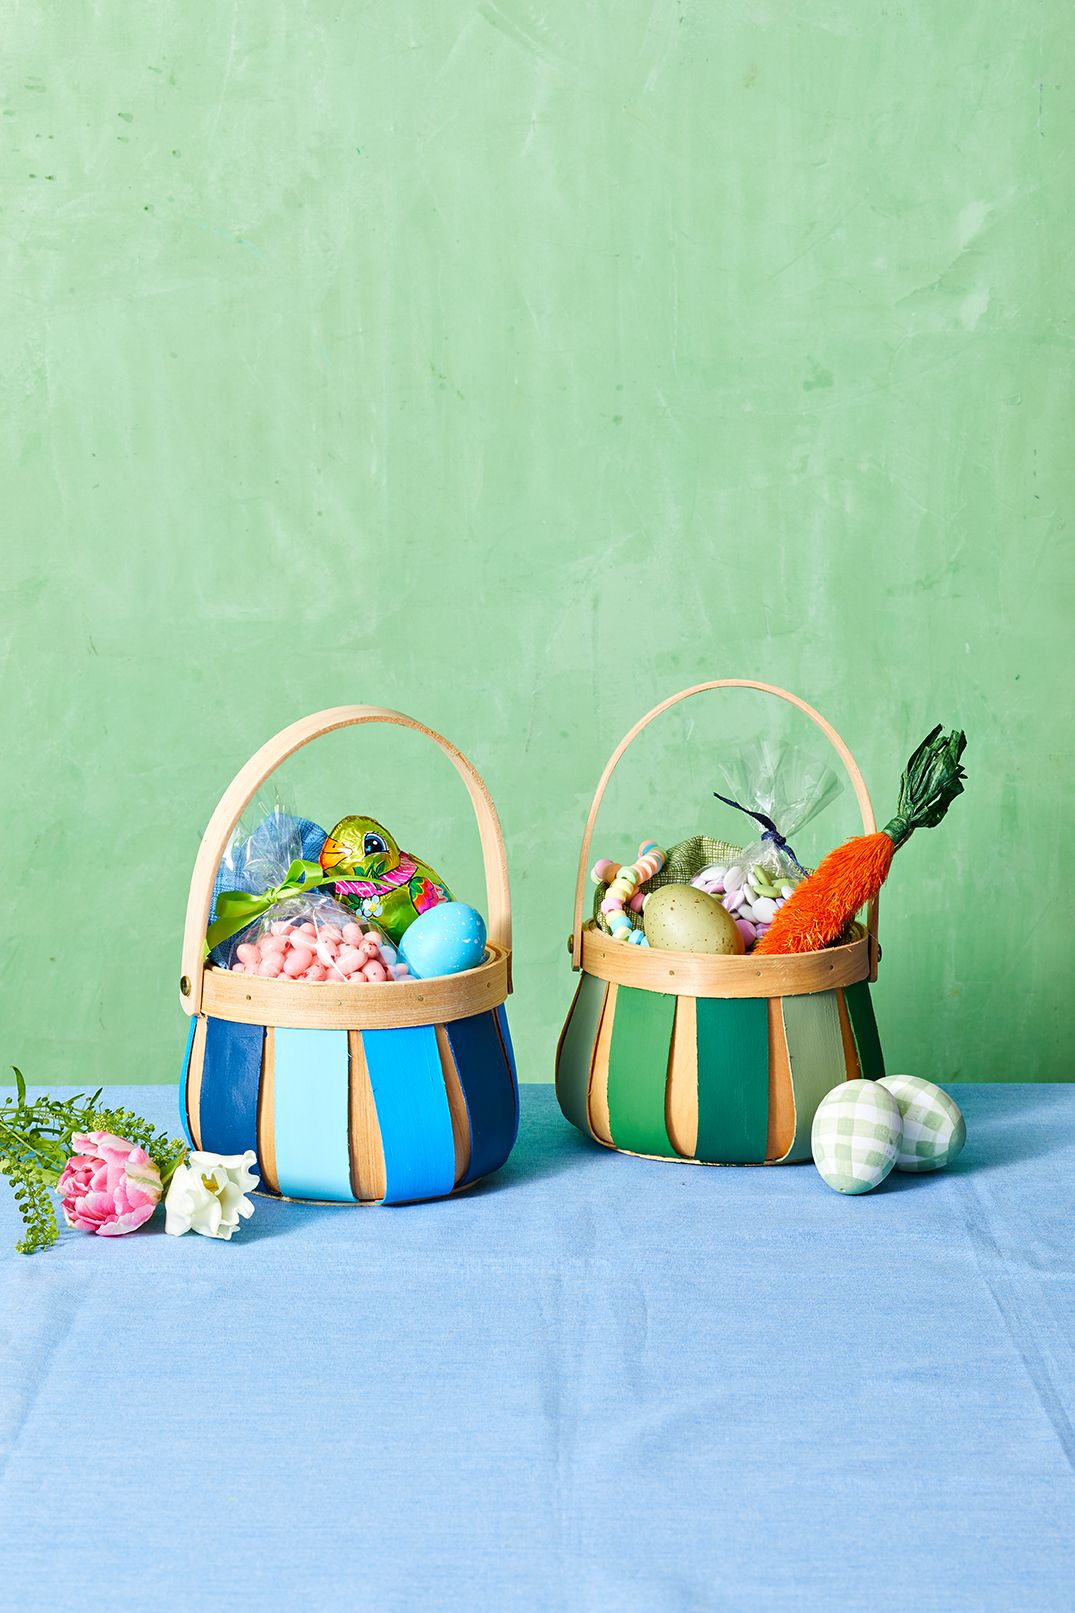 DIY Easter Basket Ideas: Step-By-Step Guide | Bouqs Blog